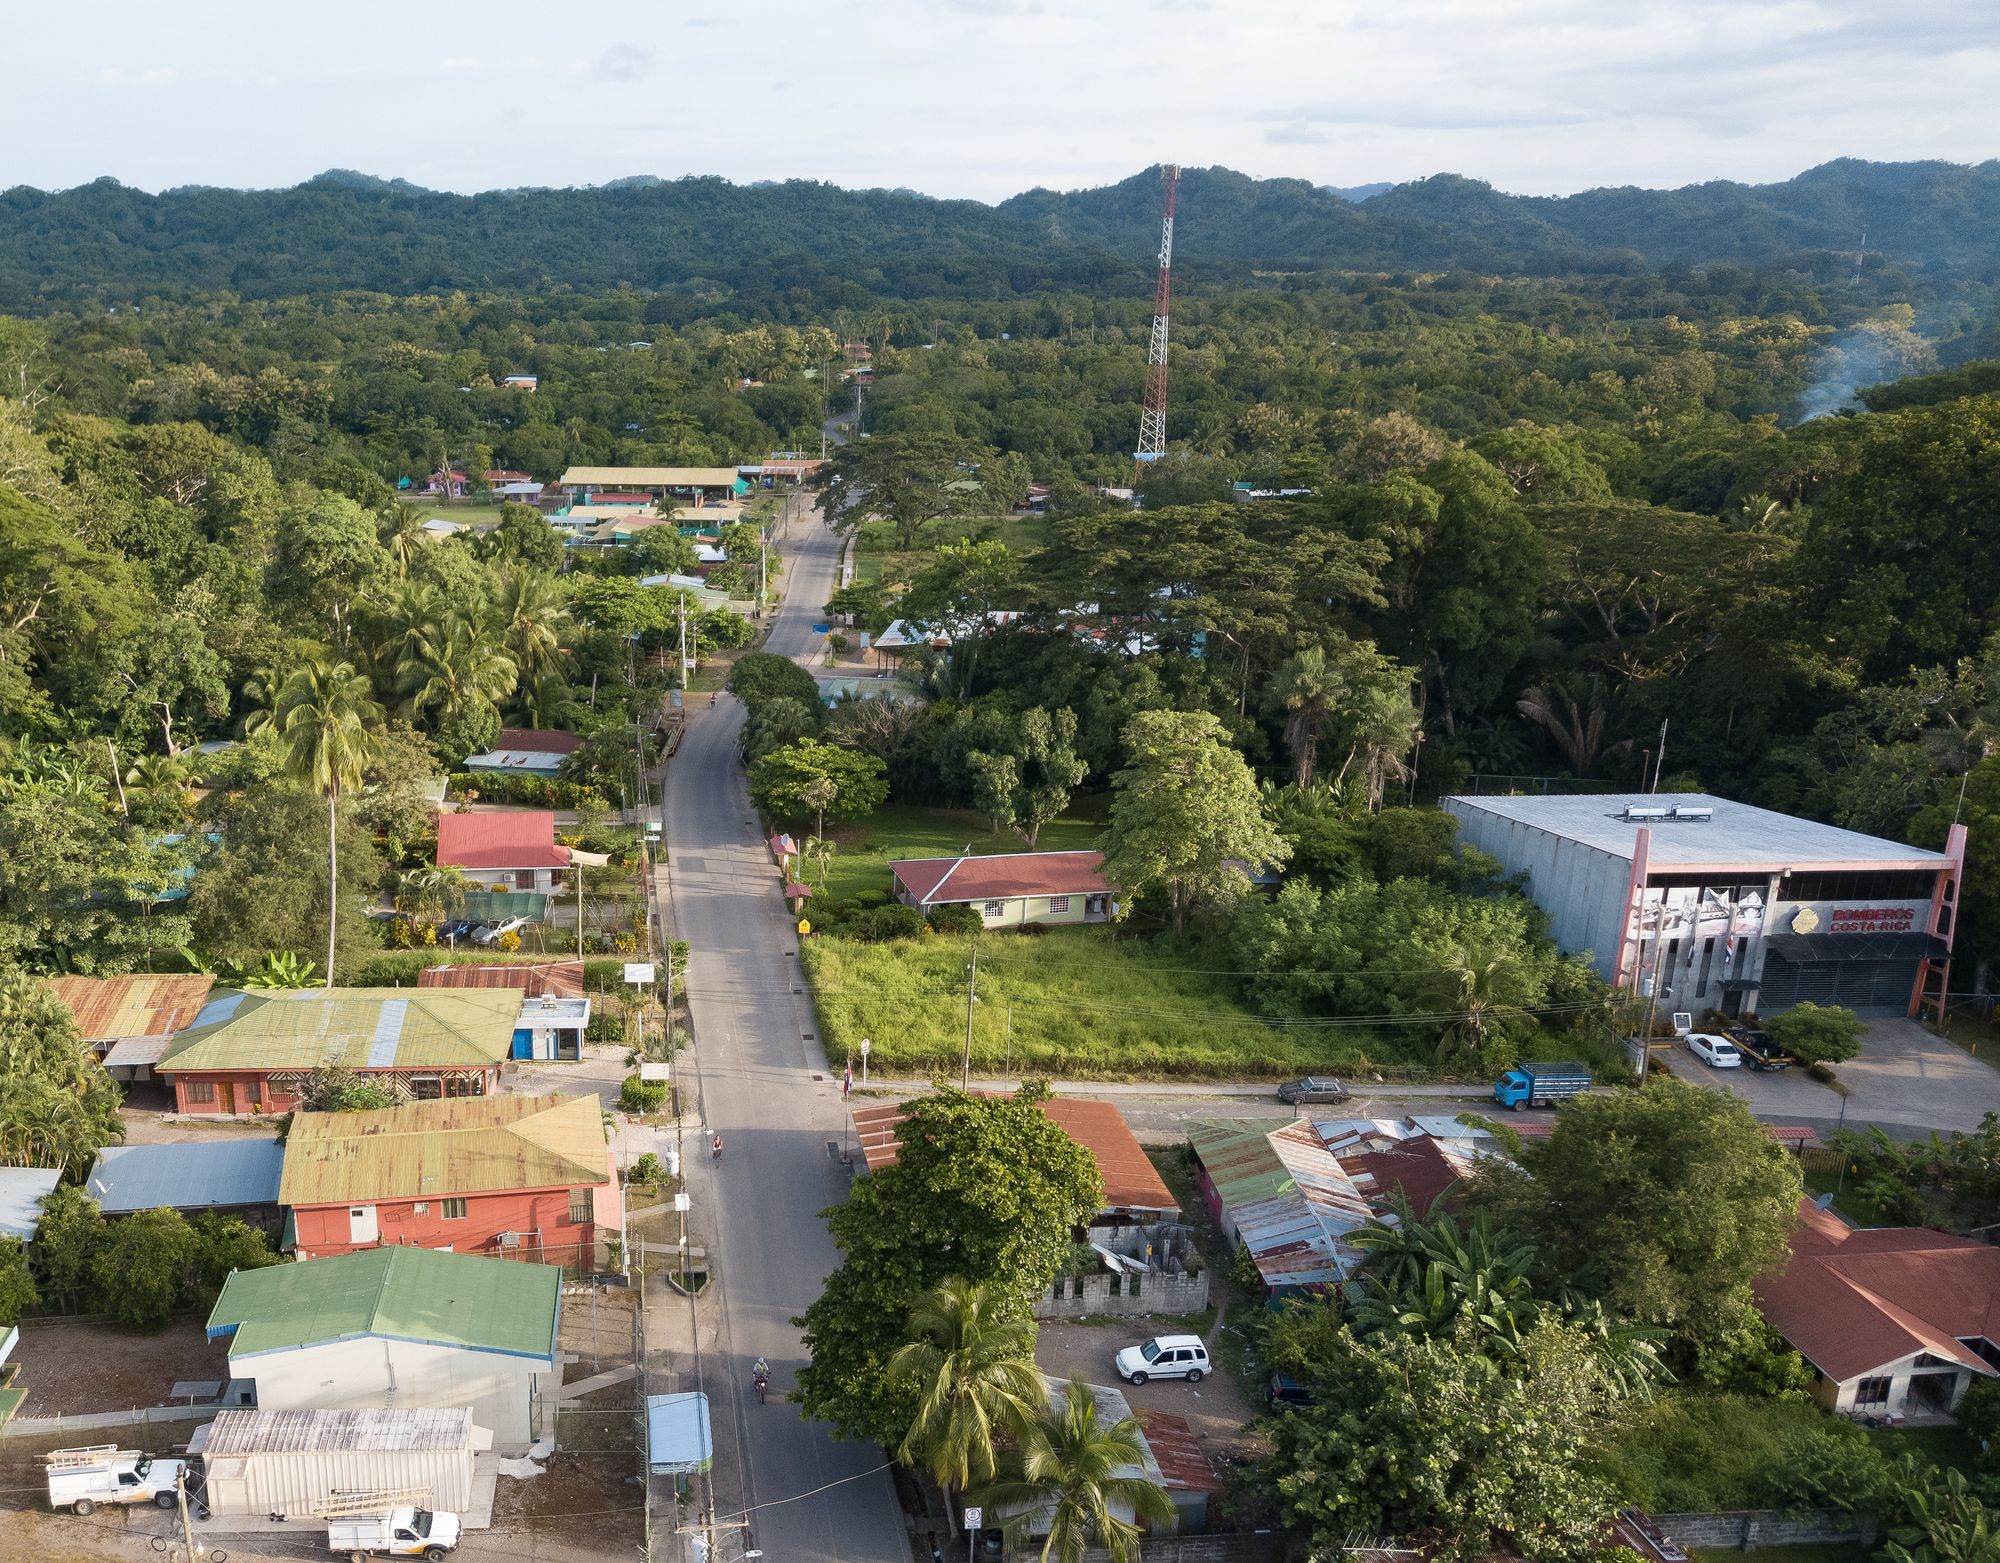 A photo of an Aerial view of Paquera, Costa Rica